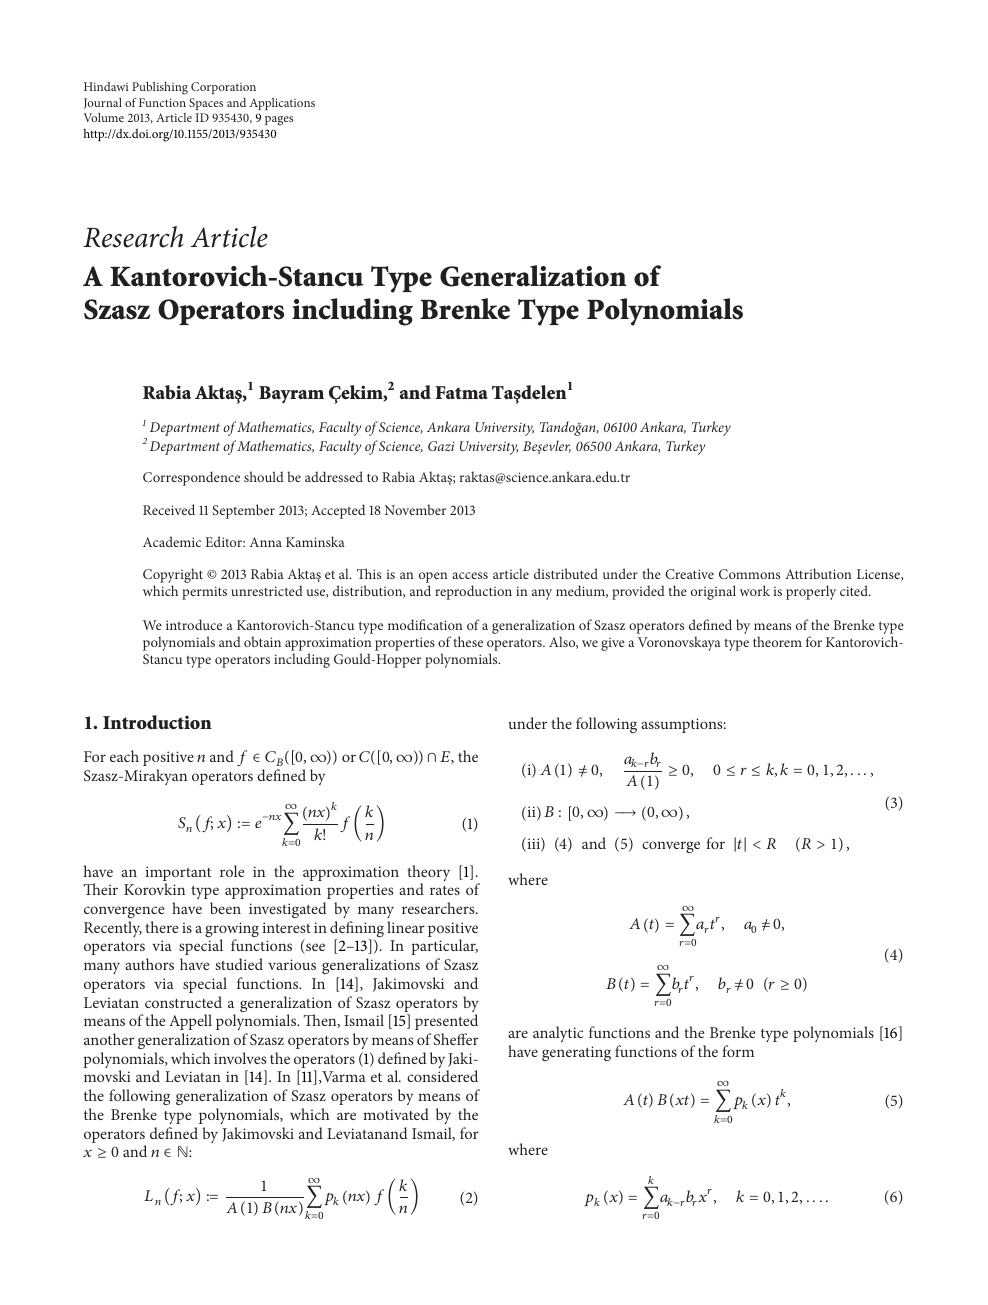 A Kantorovich Stancu Type Generalization Of Szasz Operators Including Brenke Type Polynomials Topic Of Research Paper In Mathematics Download Scholarly Article Pdf And Read For Free On Cyberleninka Open Science Hub